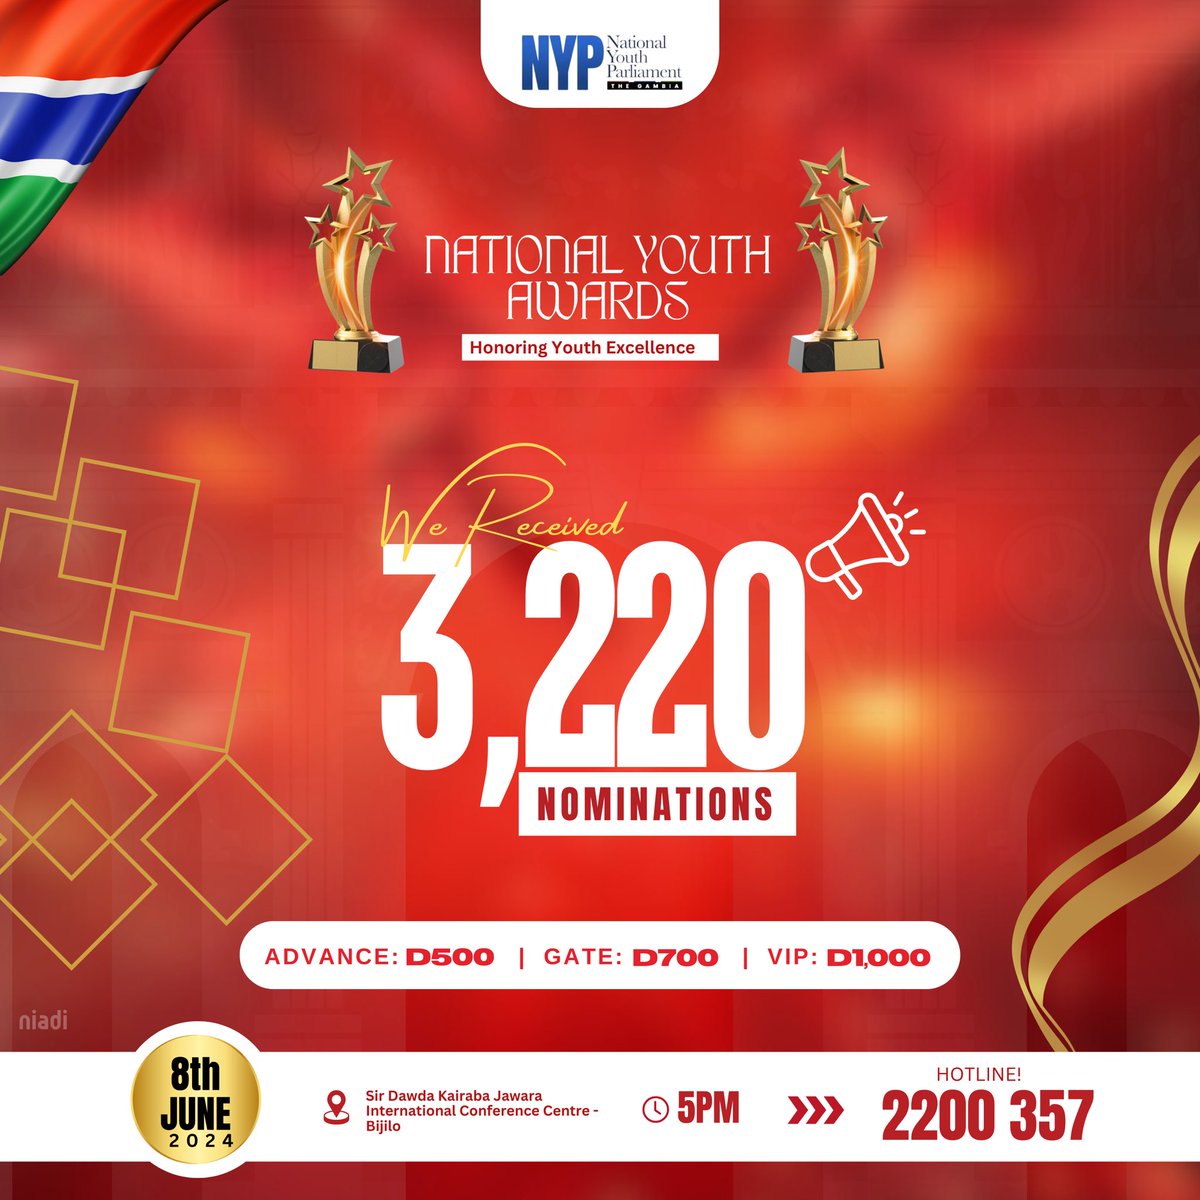 The nomination period for the #NationalYouthAwards has officially closed. We have received an outstanding total of 3,220 nominations from across and beyond the country. Thank you all for your participation. Stay tuned as the Awards Committee present the finalists soon.